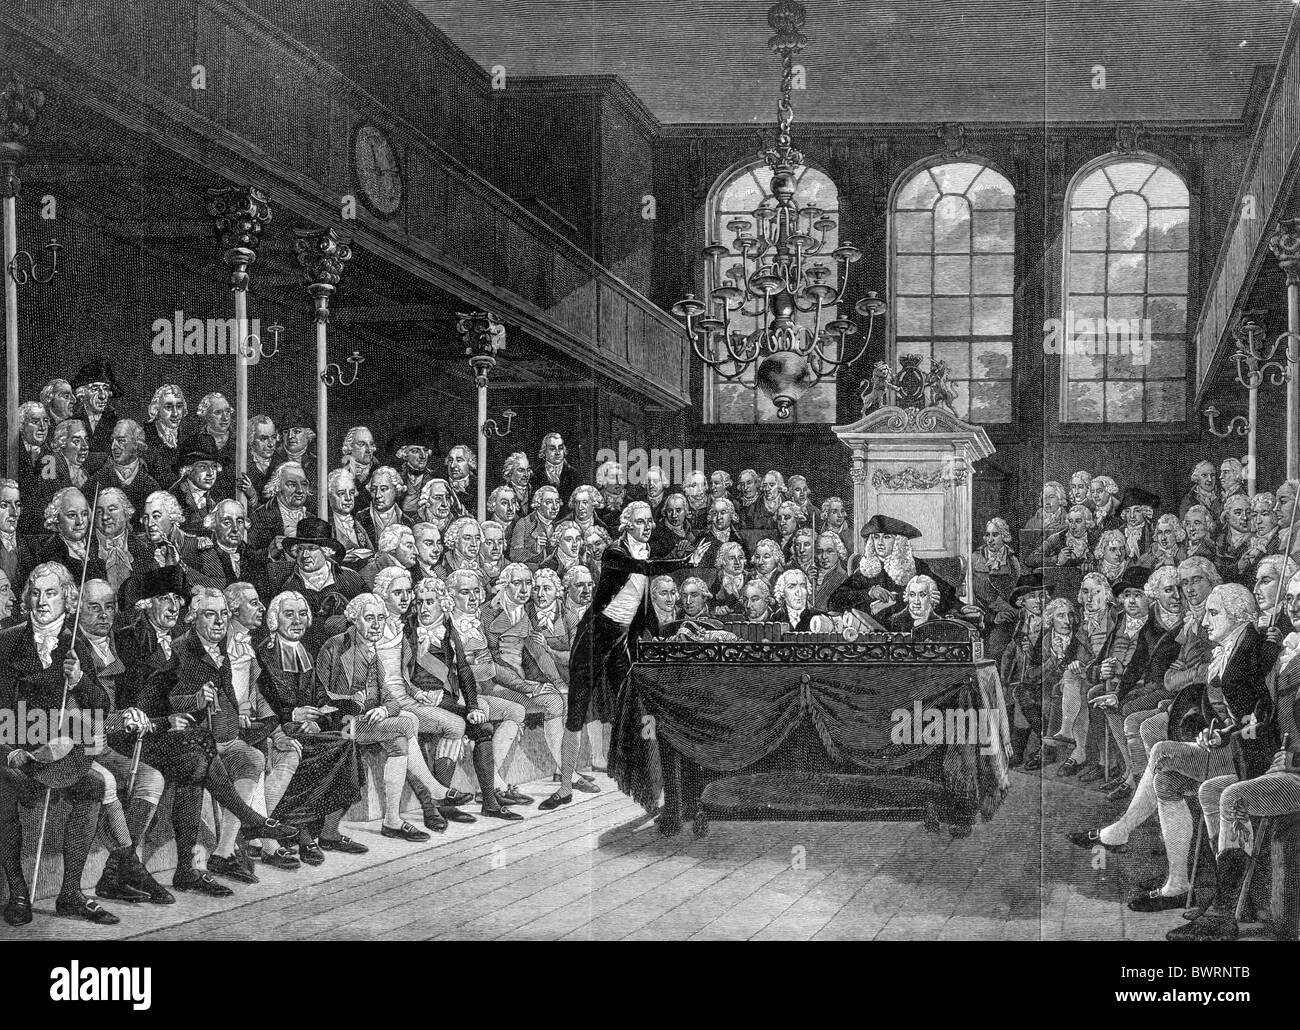 The Old House of Commons in 1793; Black and White Illustration; Stock Photo